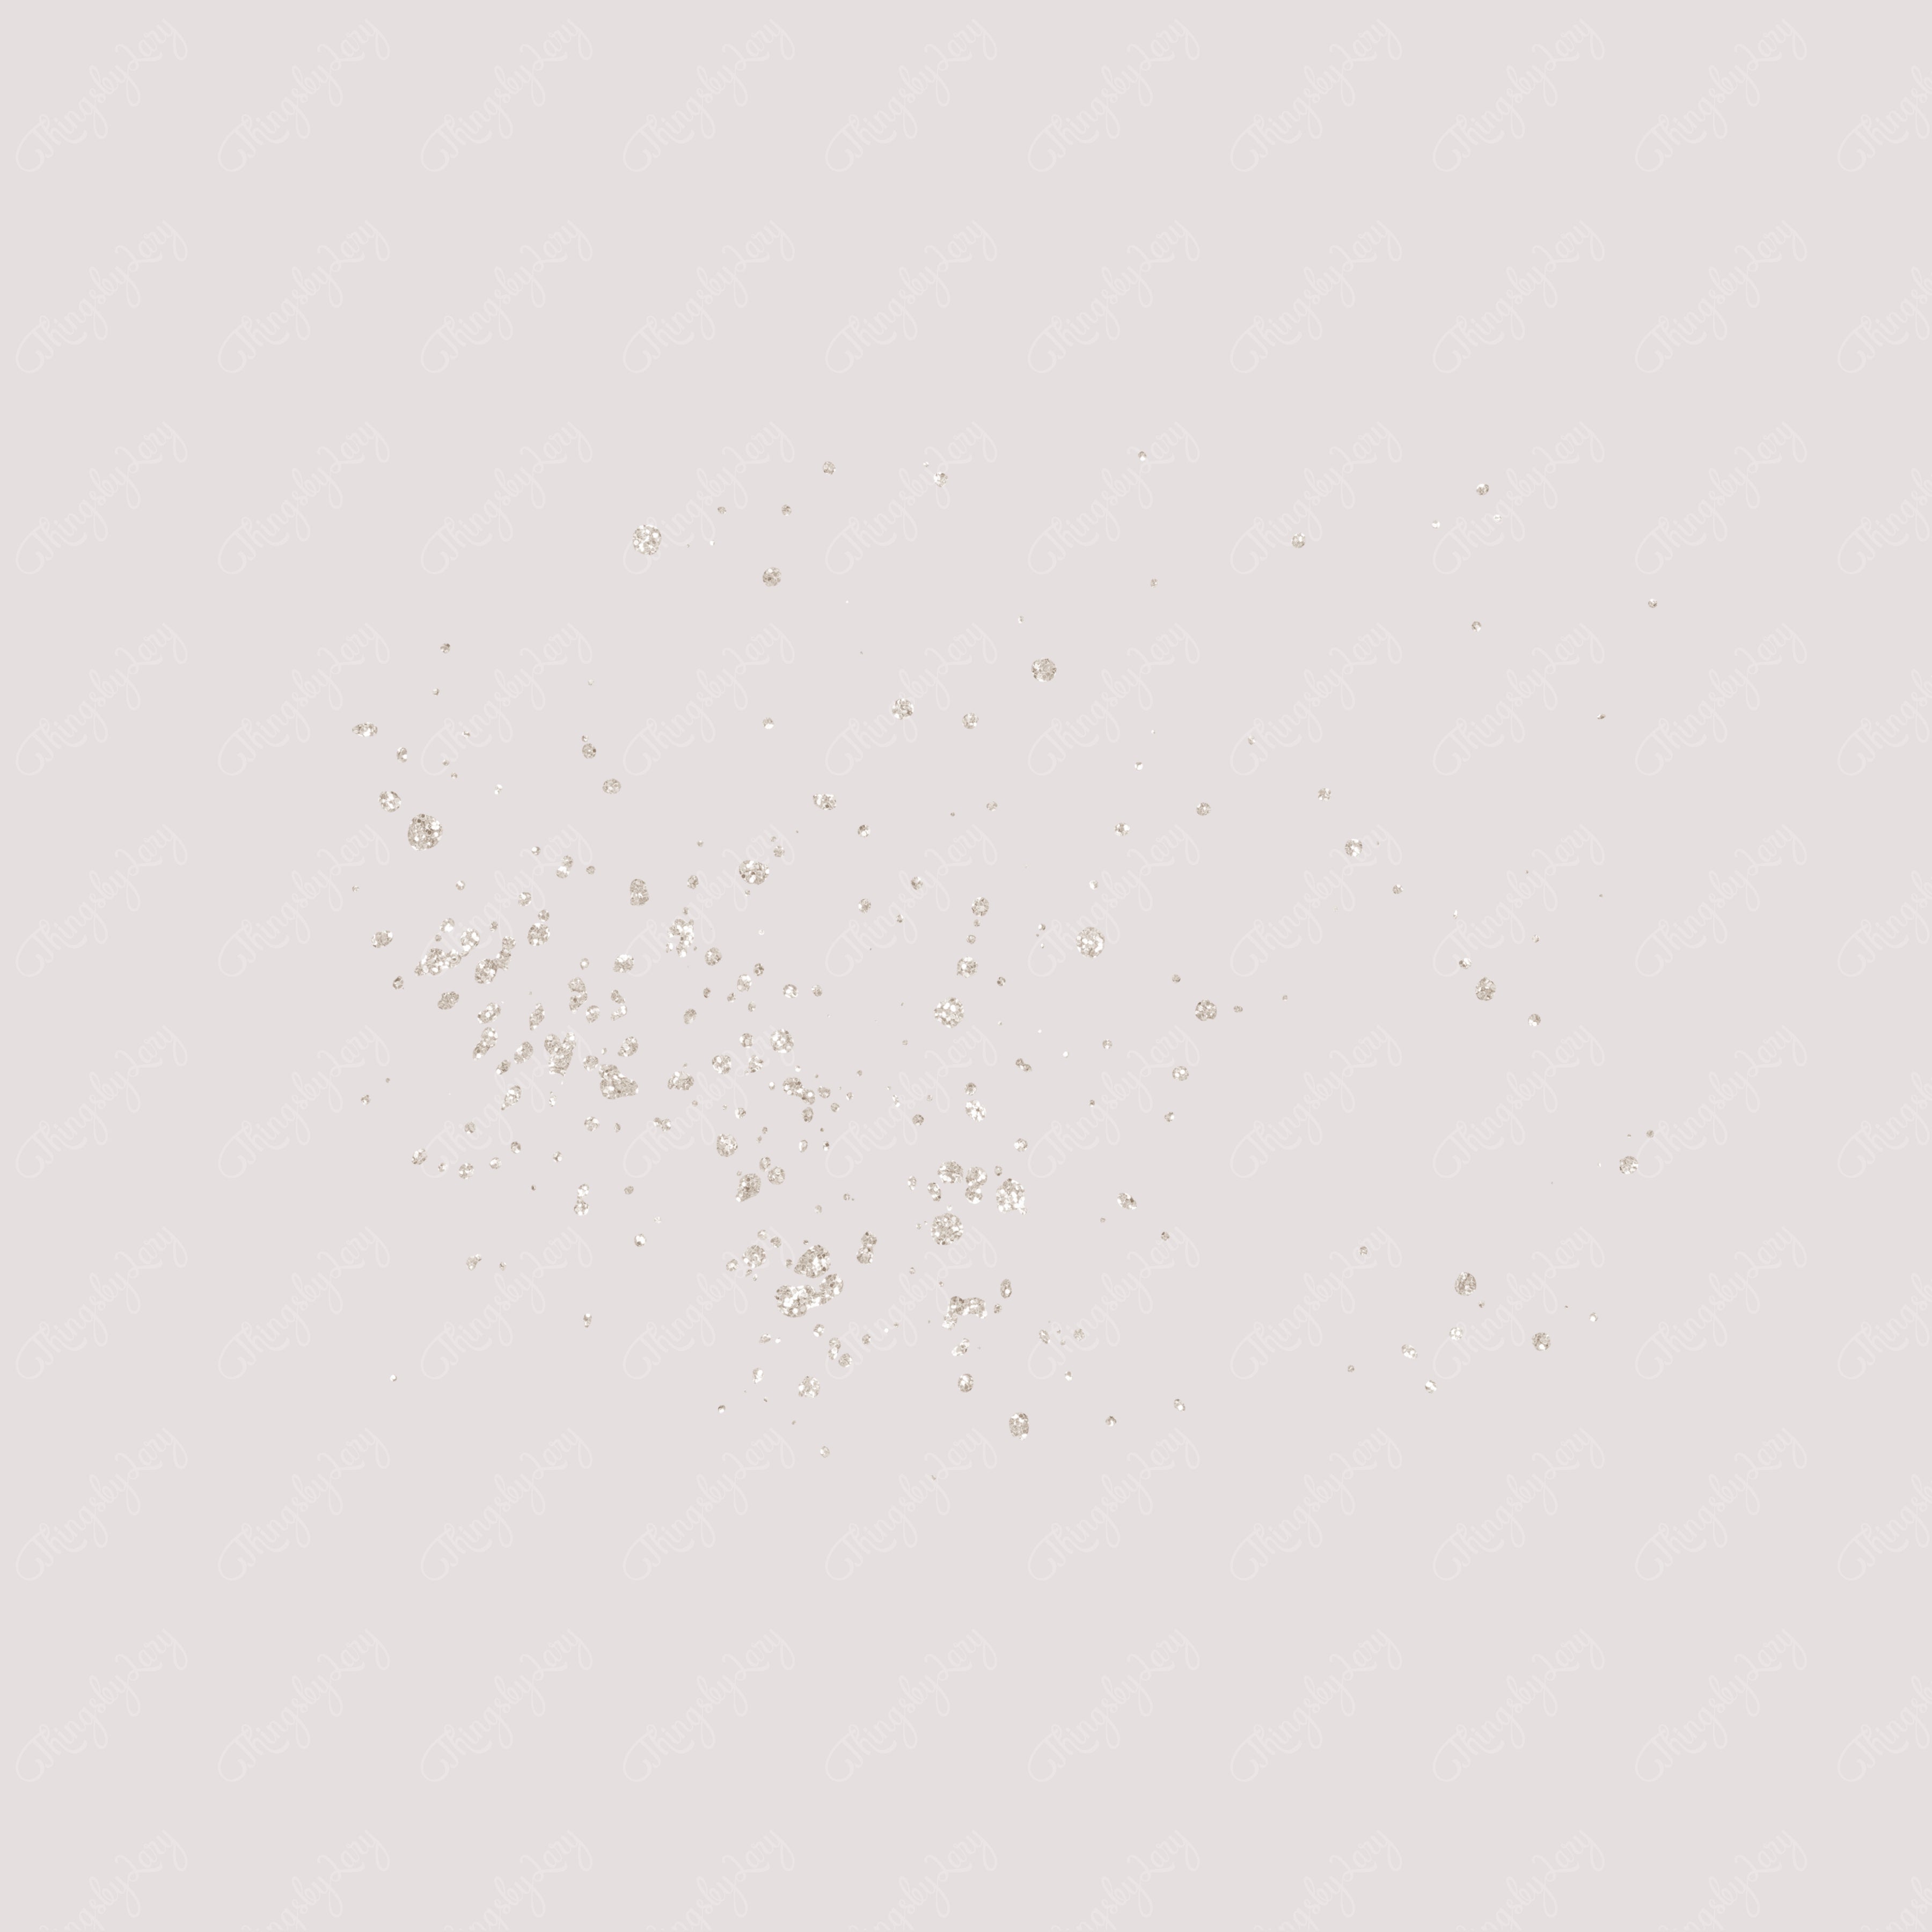 70 Champagne Glitter Particles Set PNG Overlay Images